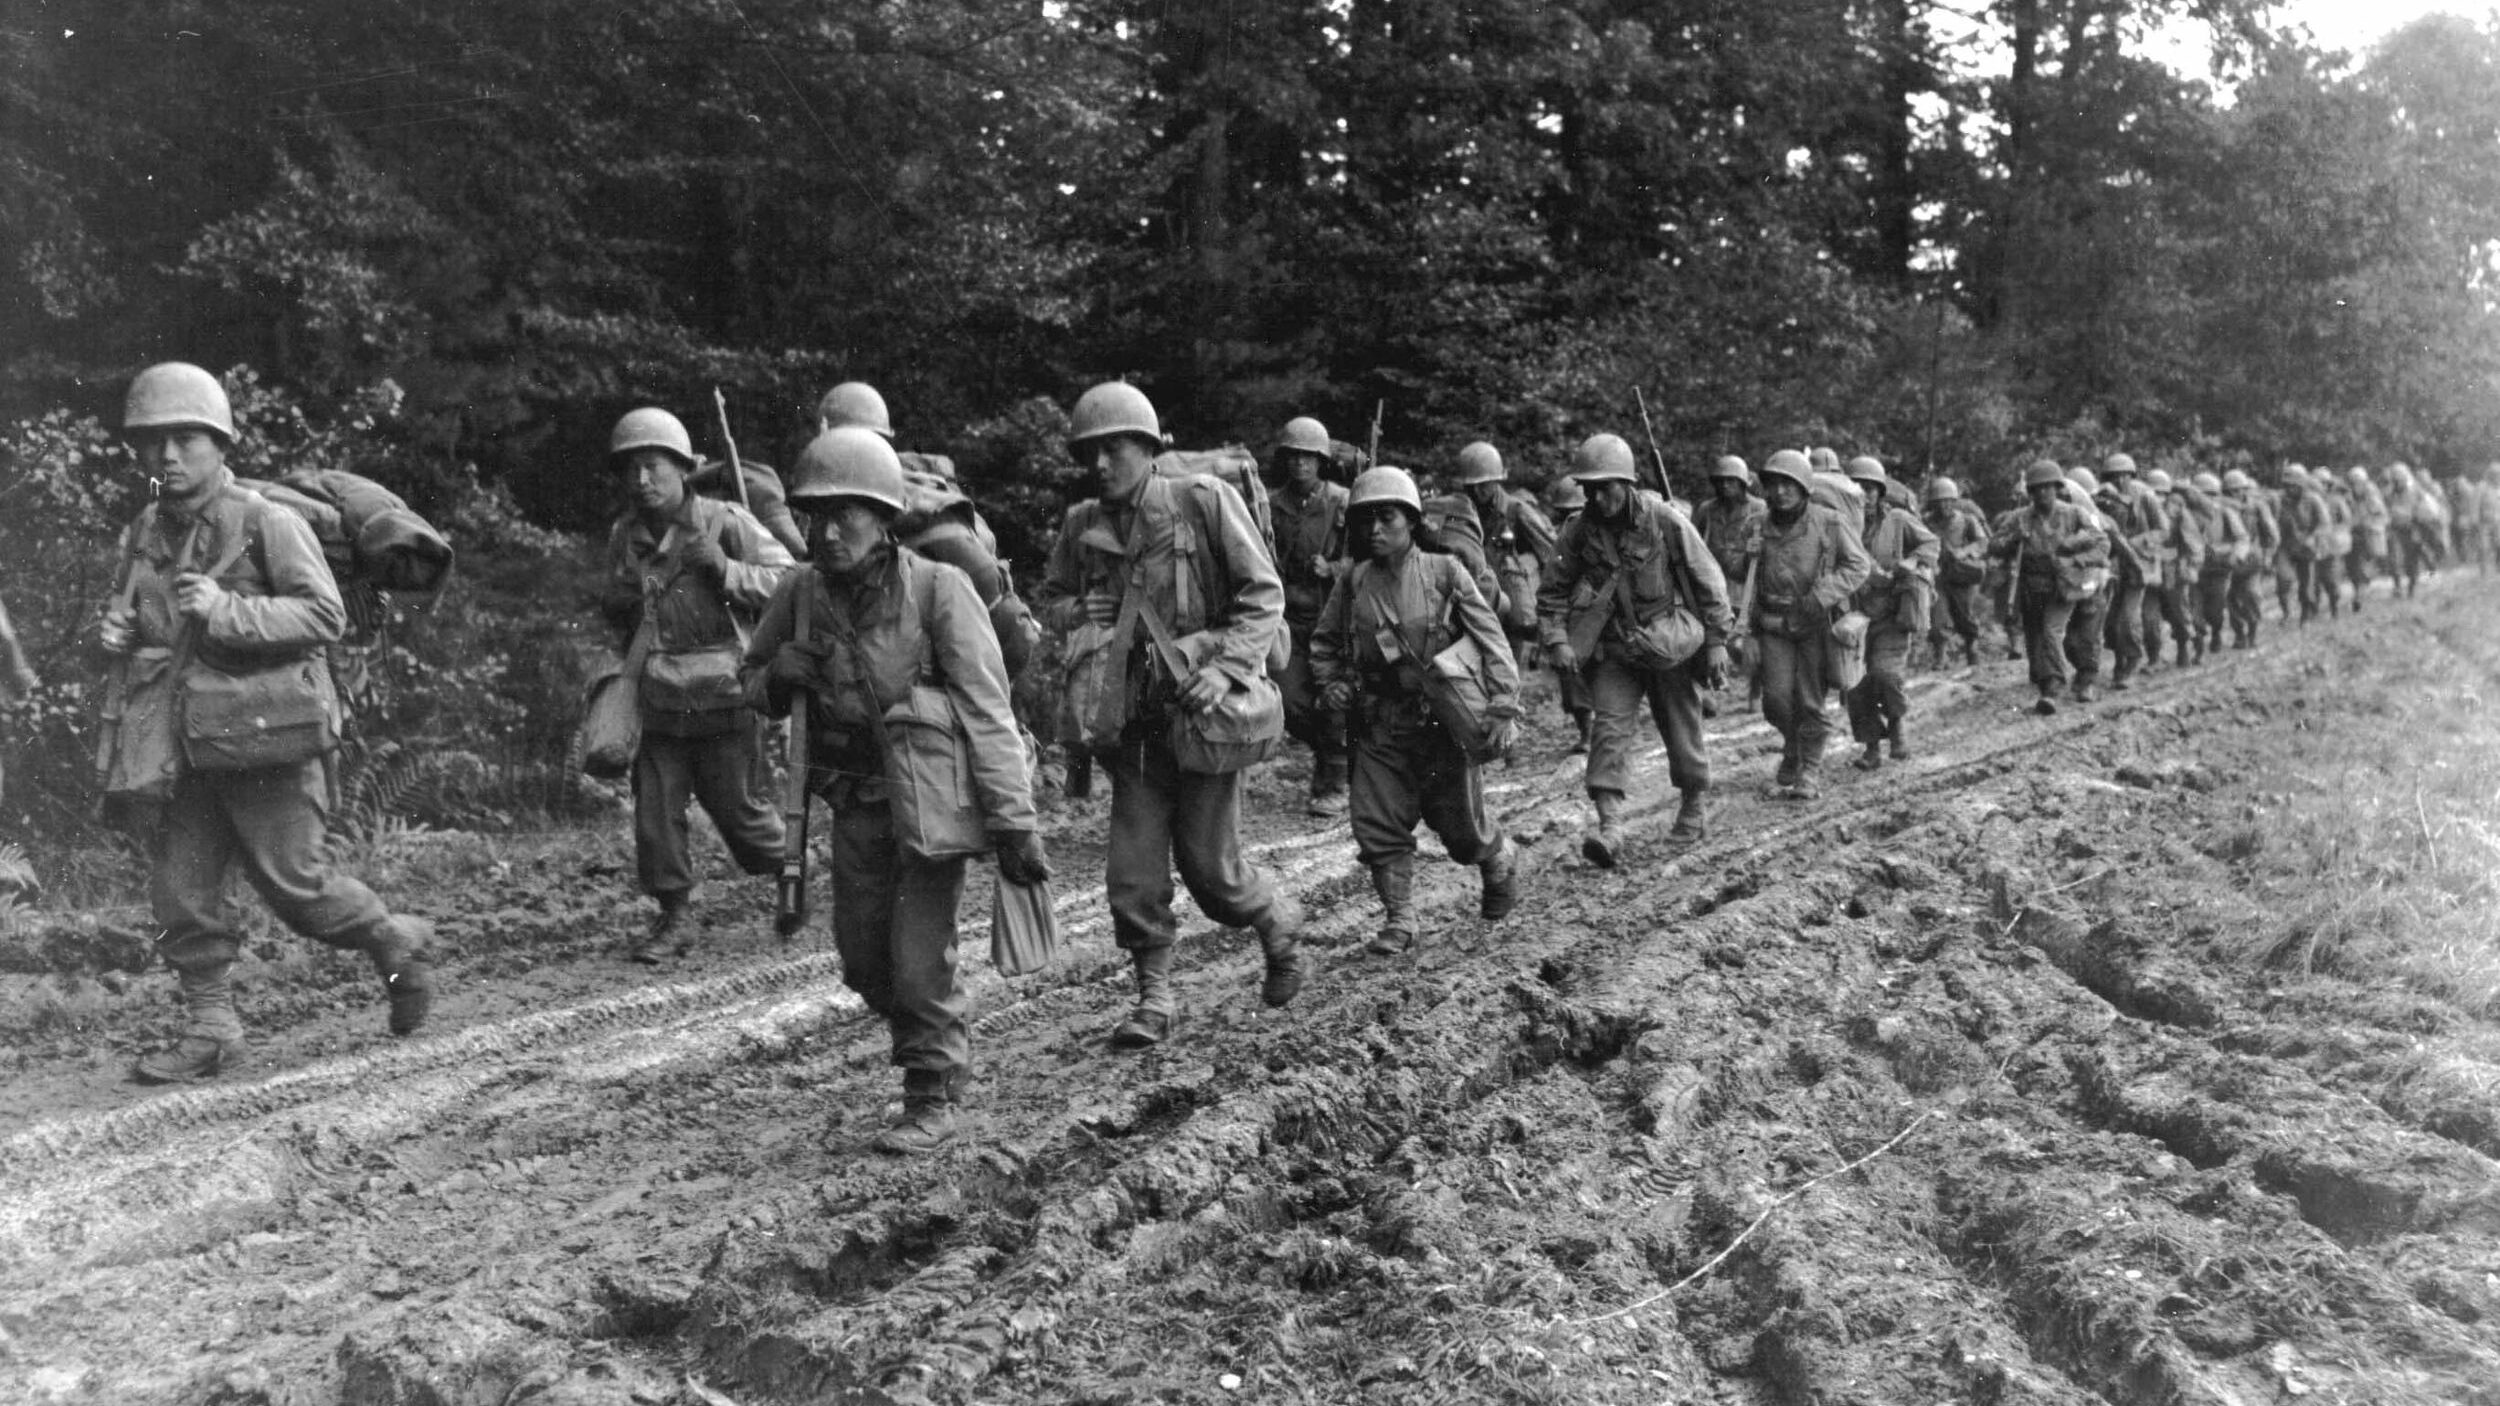 American soldiers of Japanese ancestry, these members of the 442nd Regimental Combat Team trudge down a road in France prior to their second deployment to Italy. The 442nd gained lasting fame during the Italian campaign and finished the war as one of the most highly decorated units of the U.S. Army.